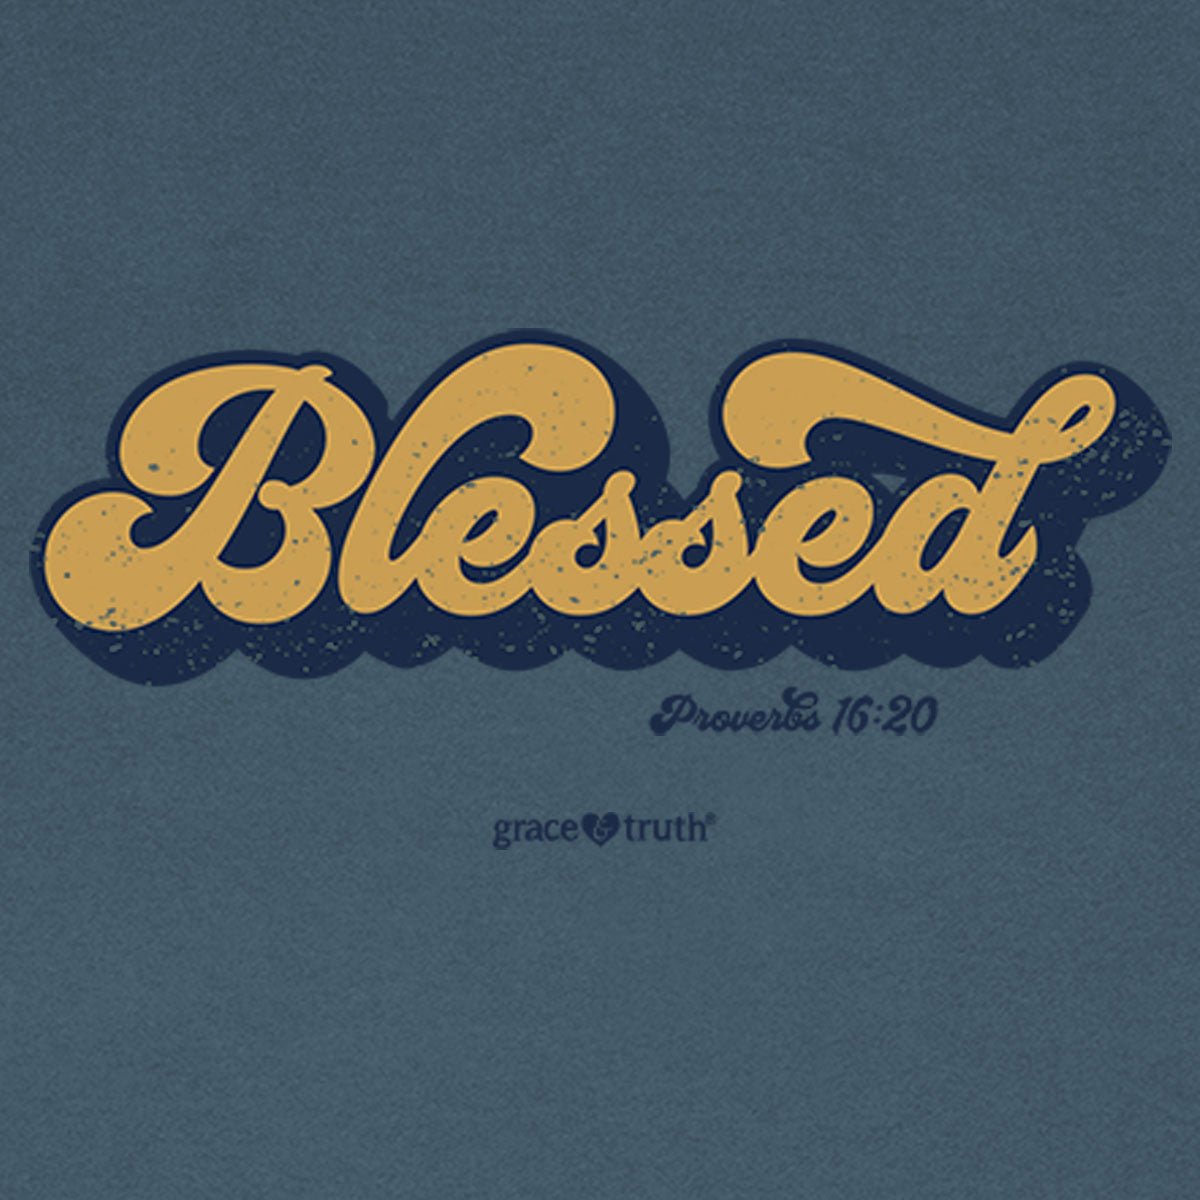 grace & truth Womens T-Shirt Blessed | 2FruitBearers